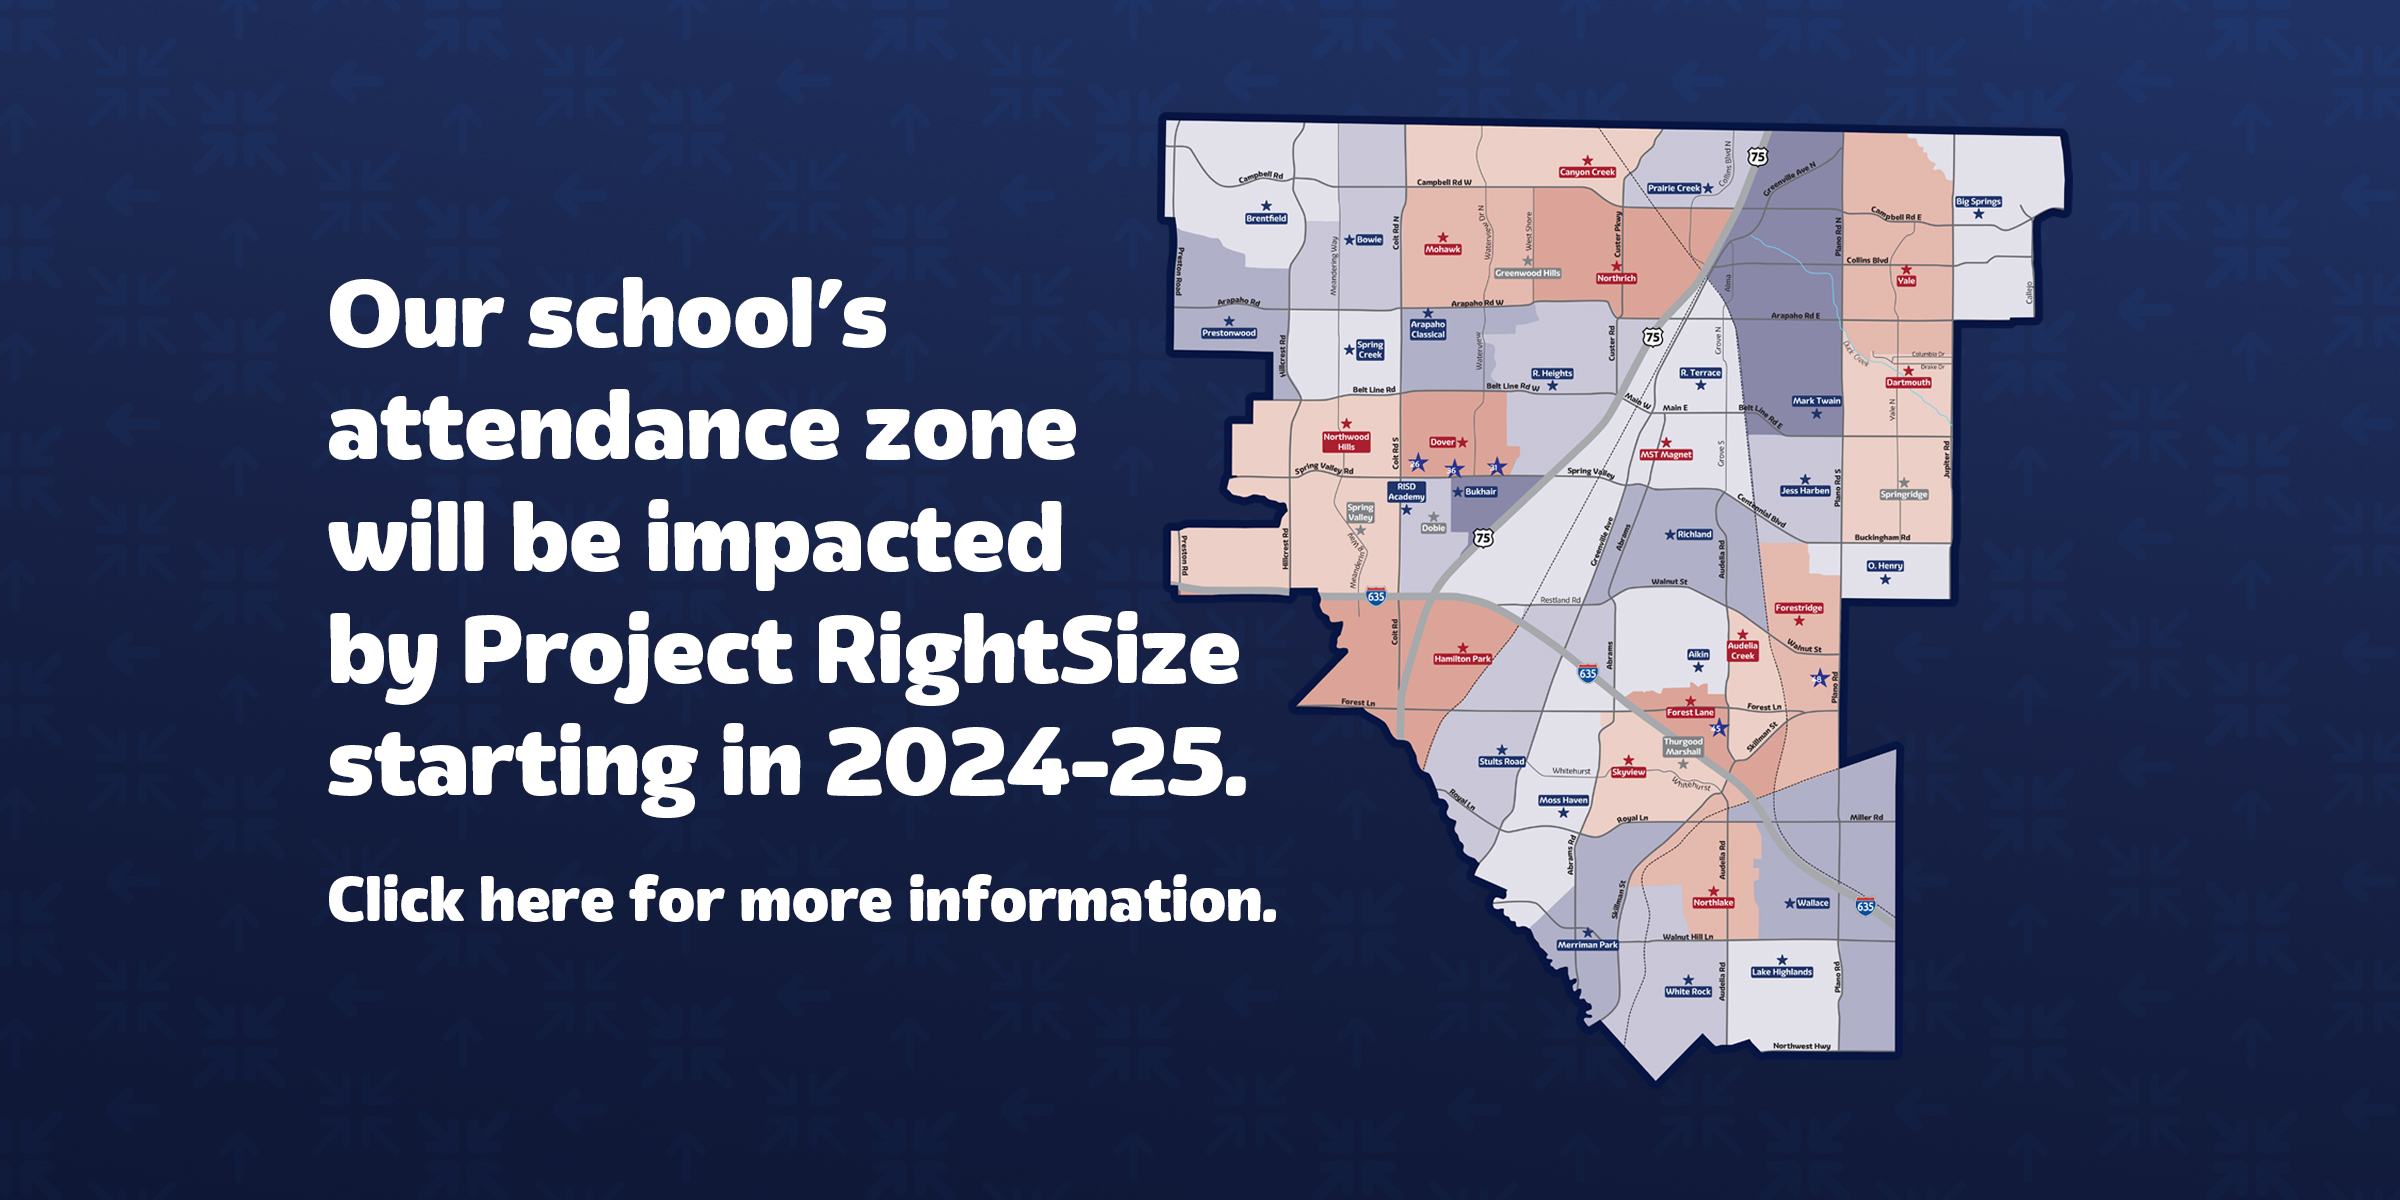 Our school's attendance zone will be impacted by Project RightSize starting in 2024-25. Click here for more information : https://web.risd.org/home/project-rightsize/